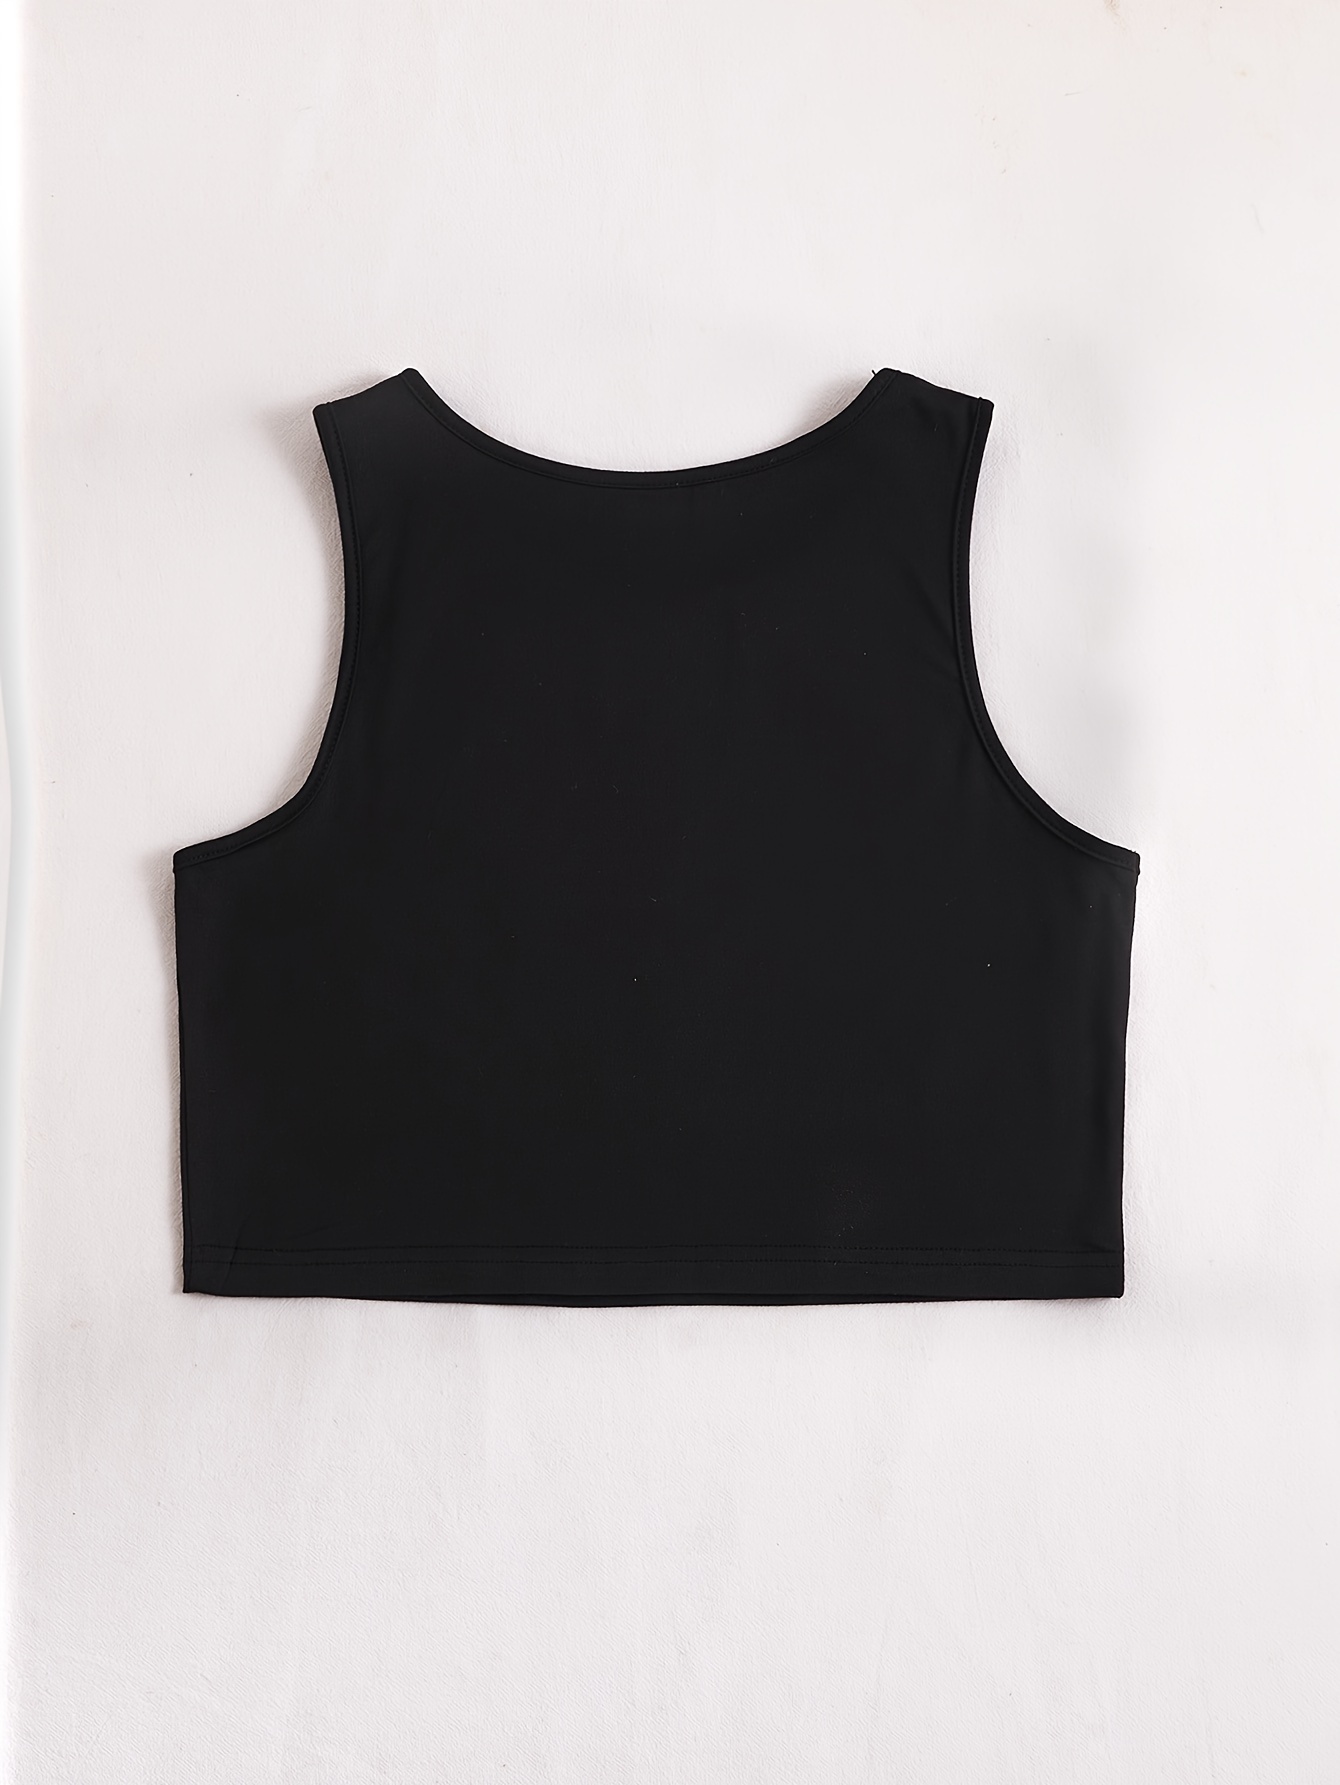 MAWCLOS Ladies Summer Crop Top Letter Print Cropped Tank Tops Square Neck T  Shirts Fashion Workout Sleeveless Tee Black XL 